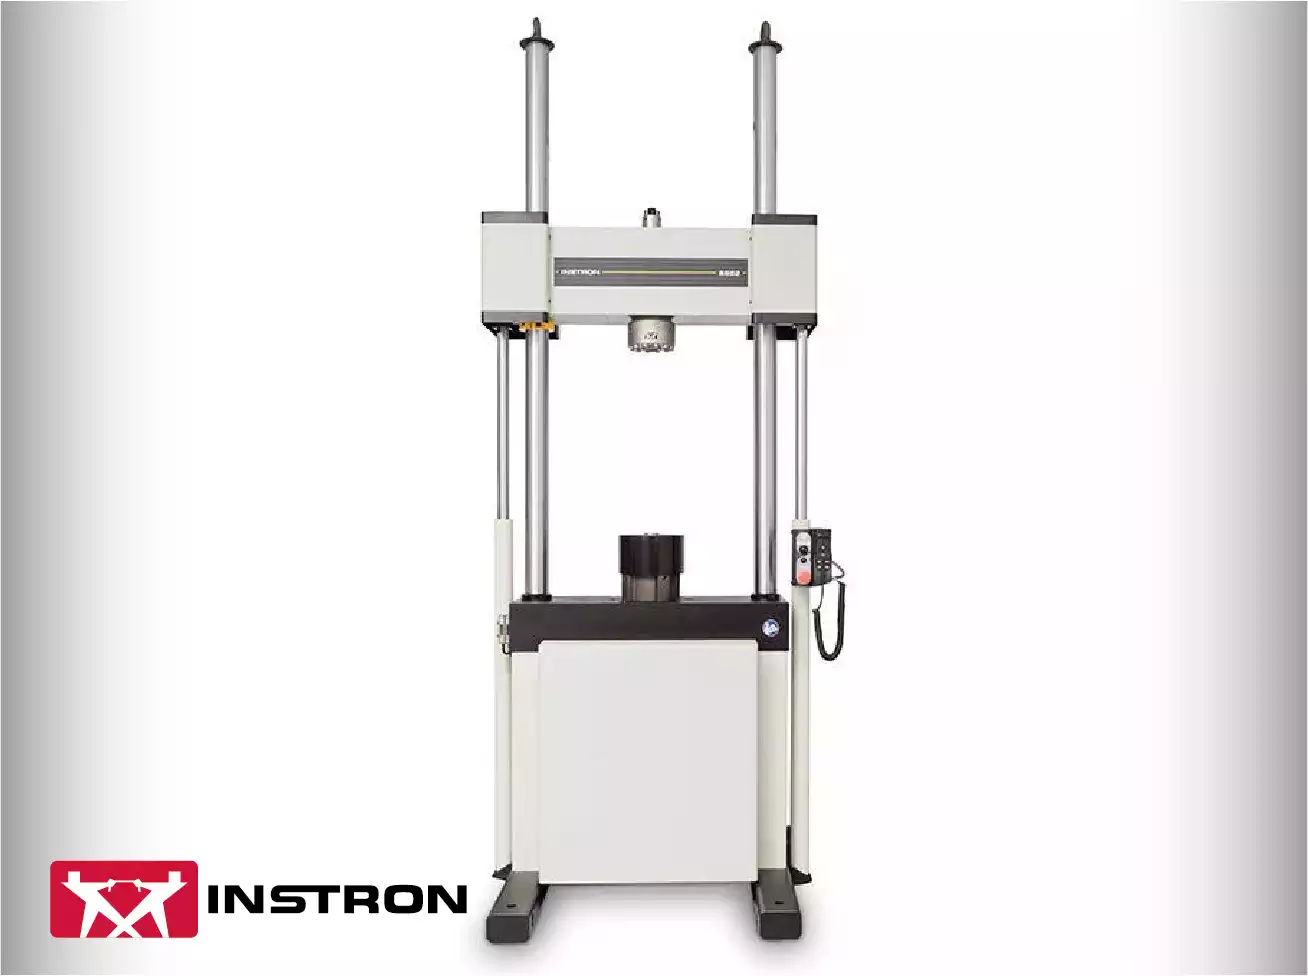 Instron Low Strain Rate 8862 Servo-Electric Systems